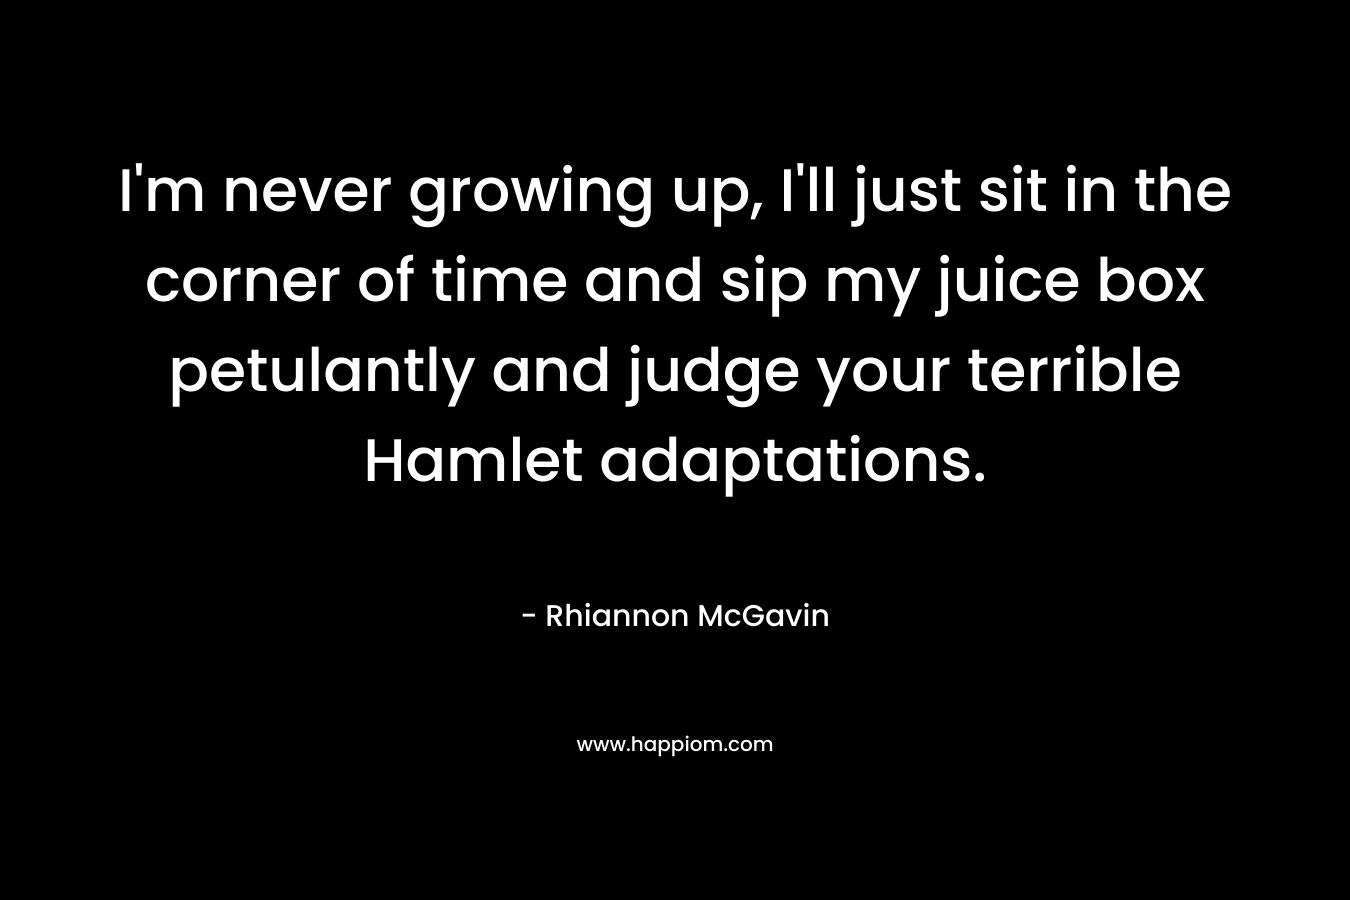 I’m never growing up, I’ll just sit in the corner of time and sip my juice box petulantly and judge your terrible Hamlet adaptations. – Rhiannon McGavin